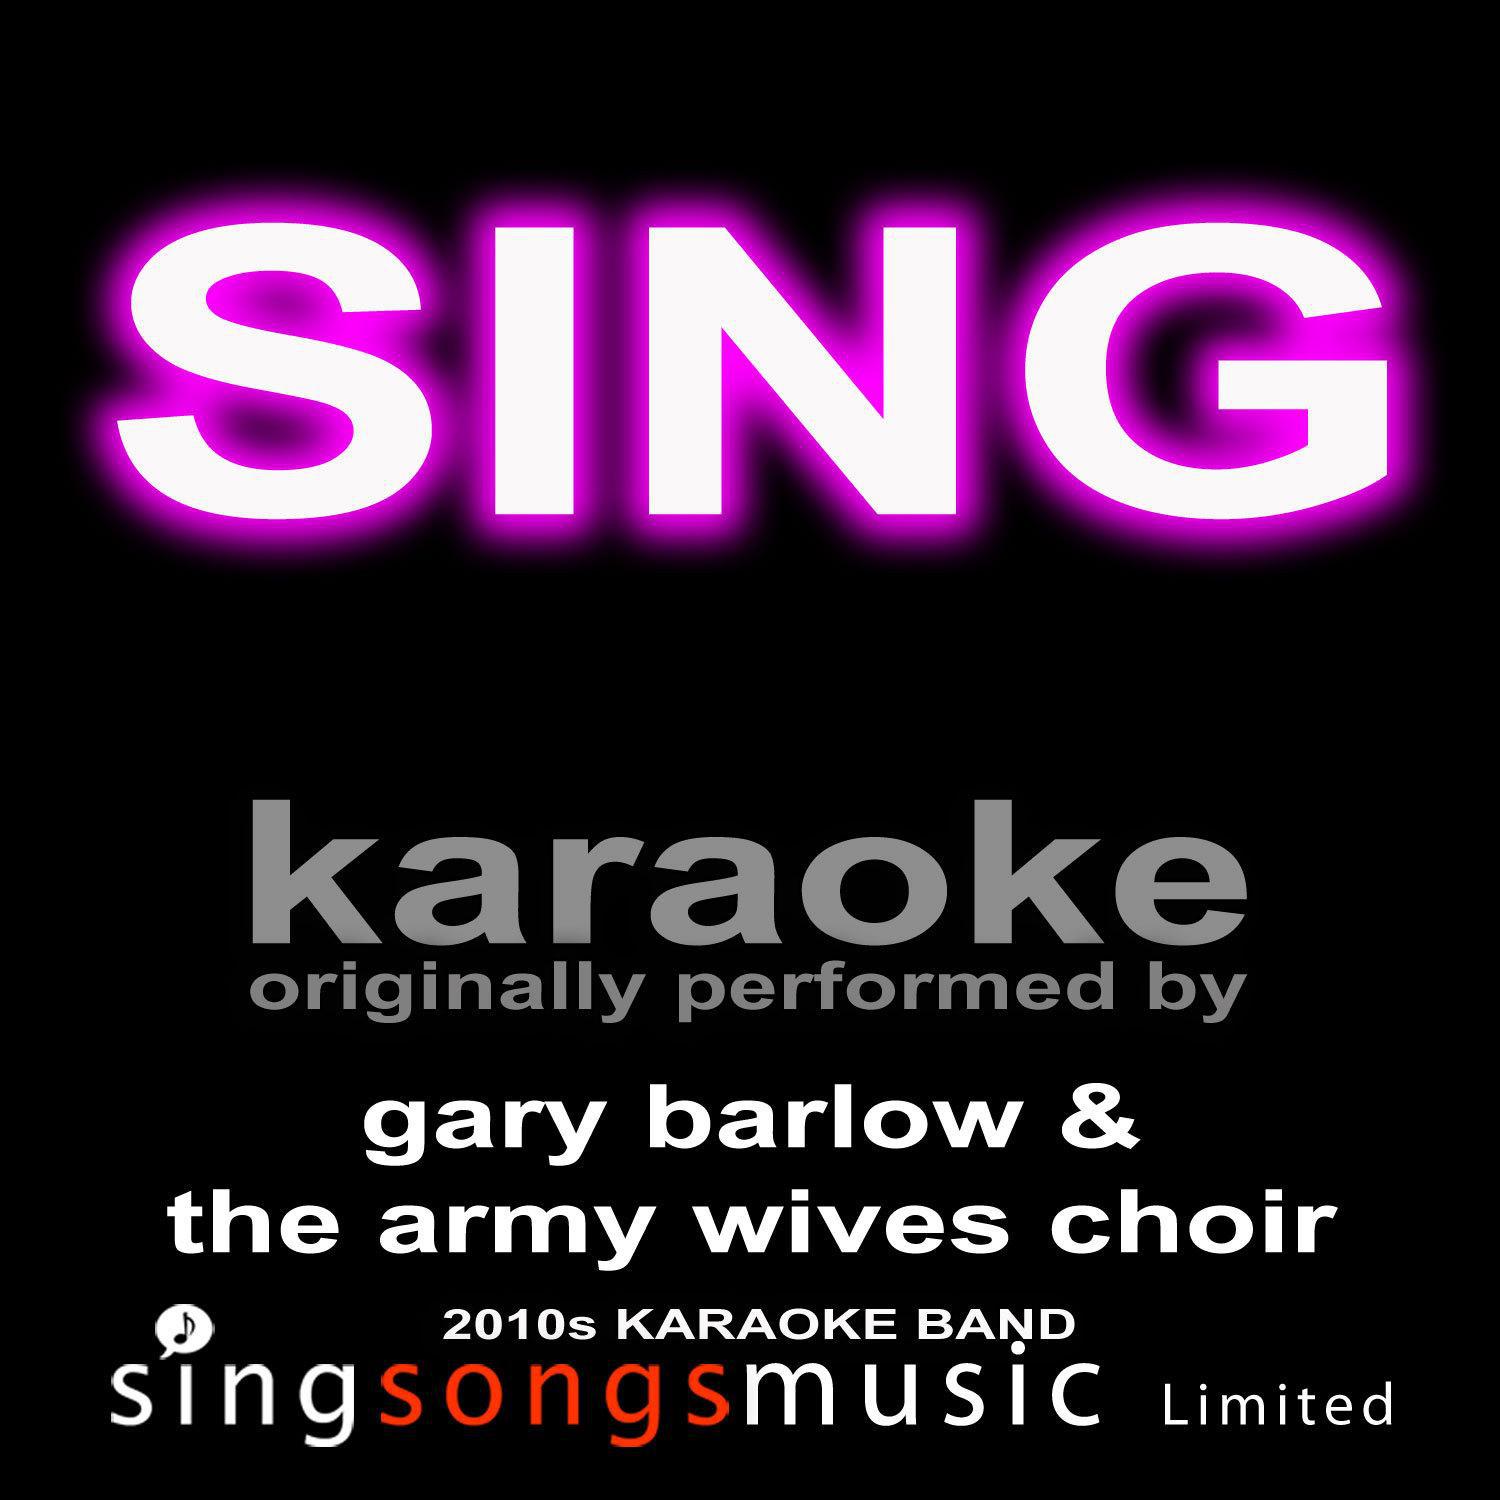 sing (originally performed by gary barlow & the military wives